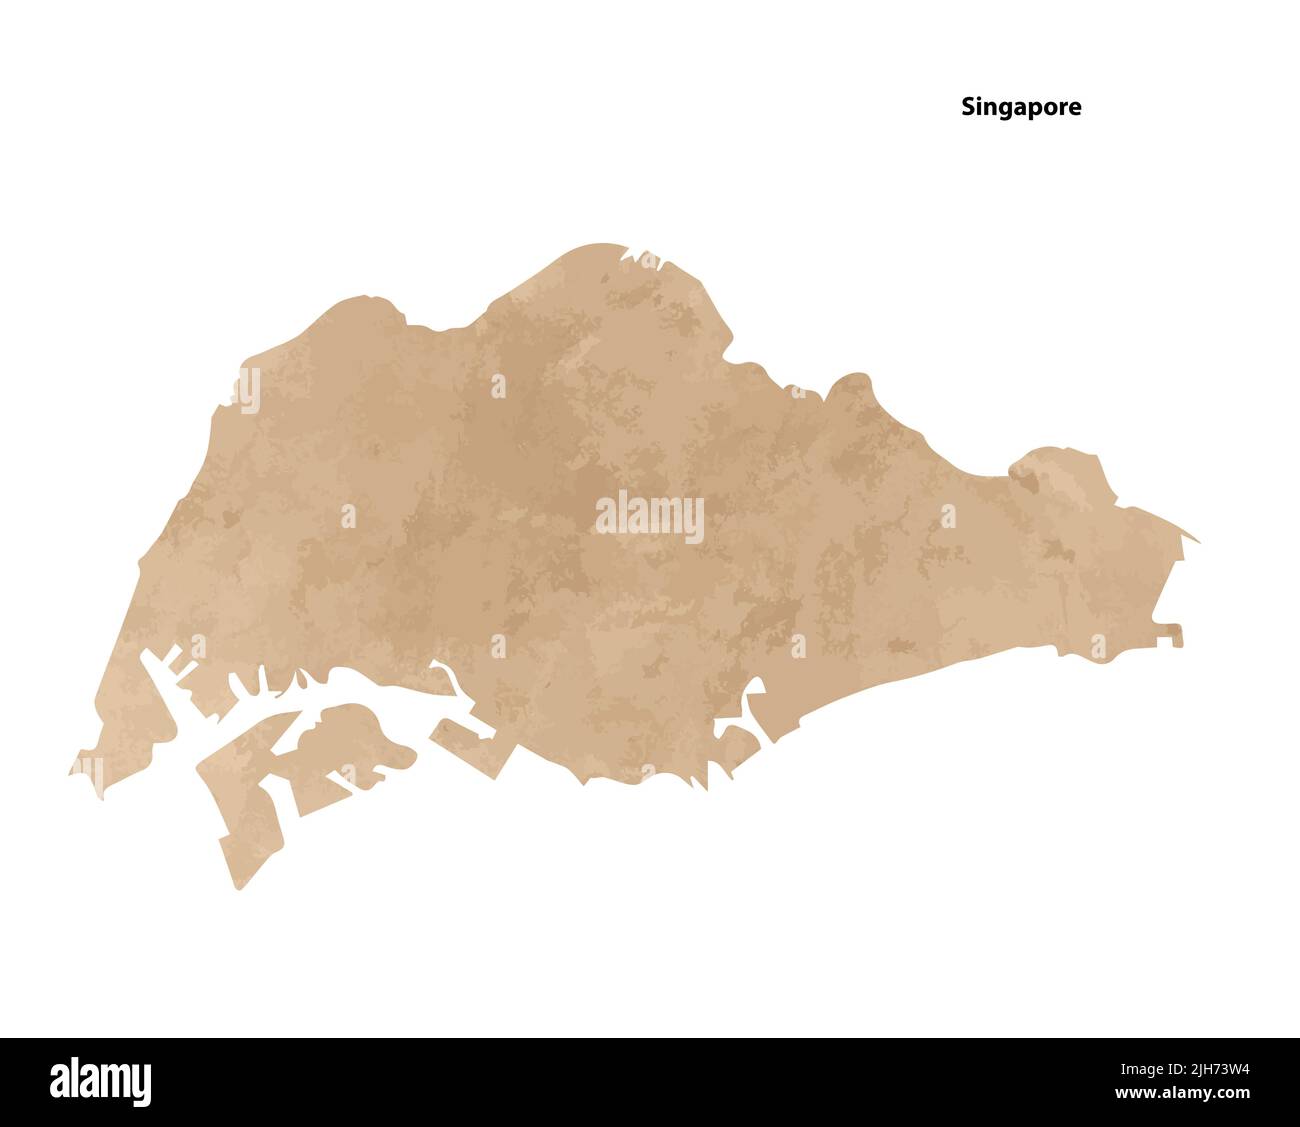 Old vintage paper textured map of Singapore Country - Vector illustration Stock Vector